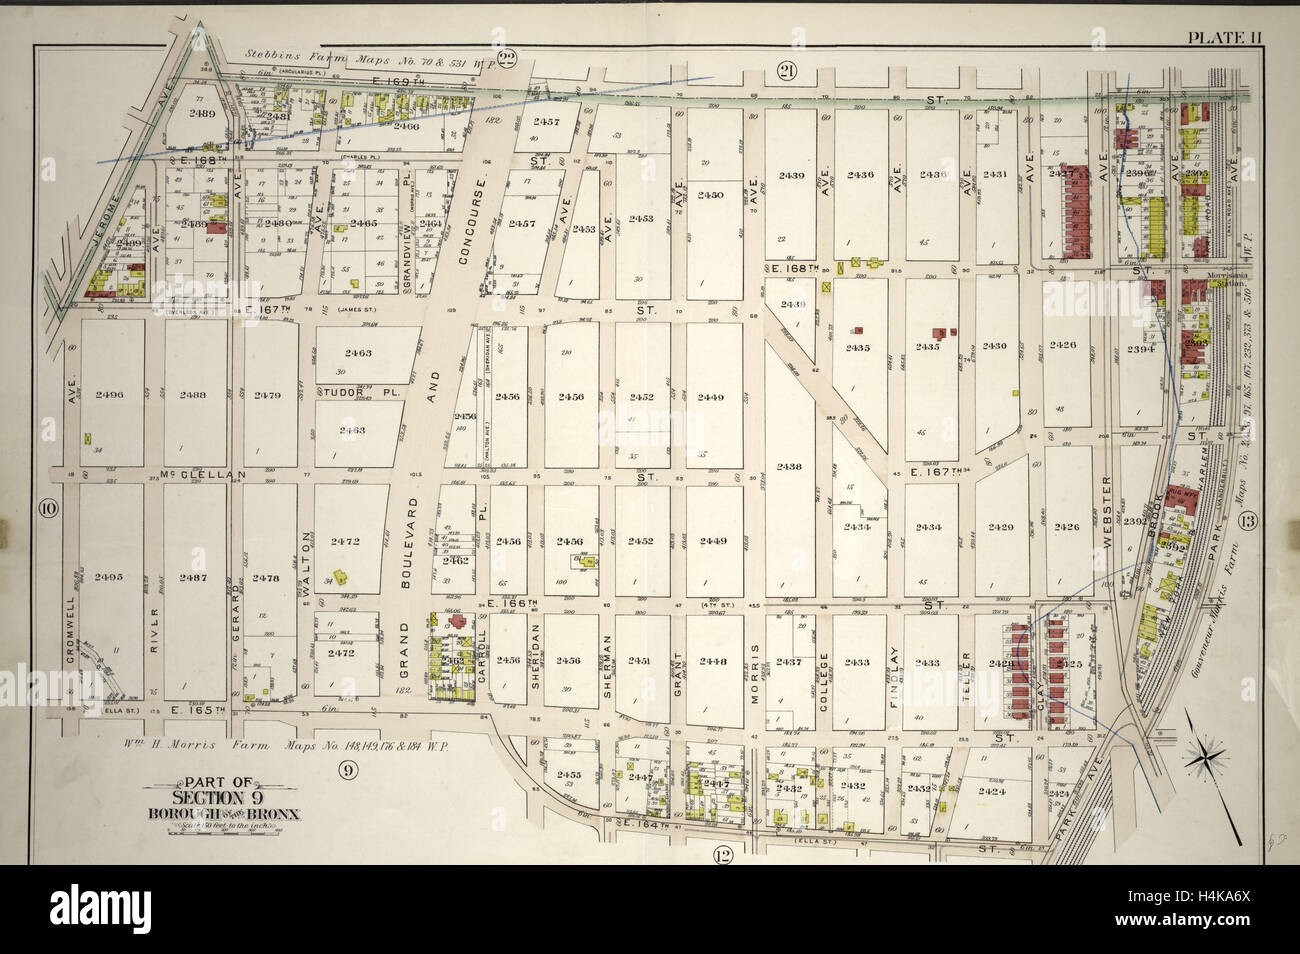 Plate 11: Part of Section 9, Borough of the Bronx. Bounded by Jerome Avenue, E. 169th Street, Park Avenue, E. 164th Street Stock Photo